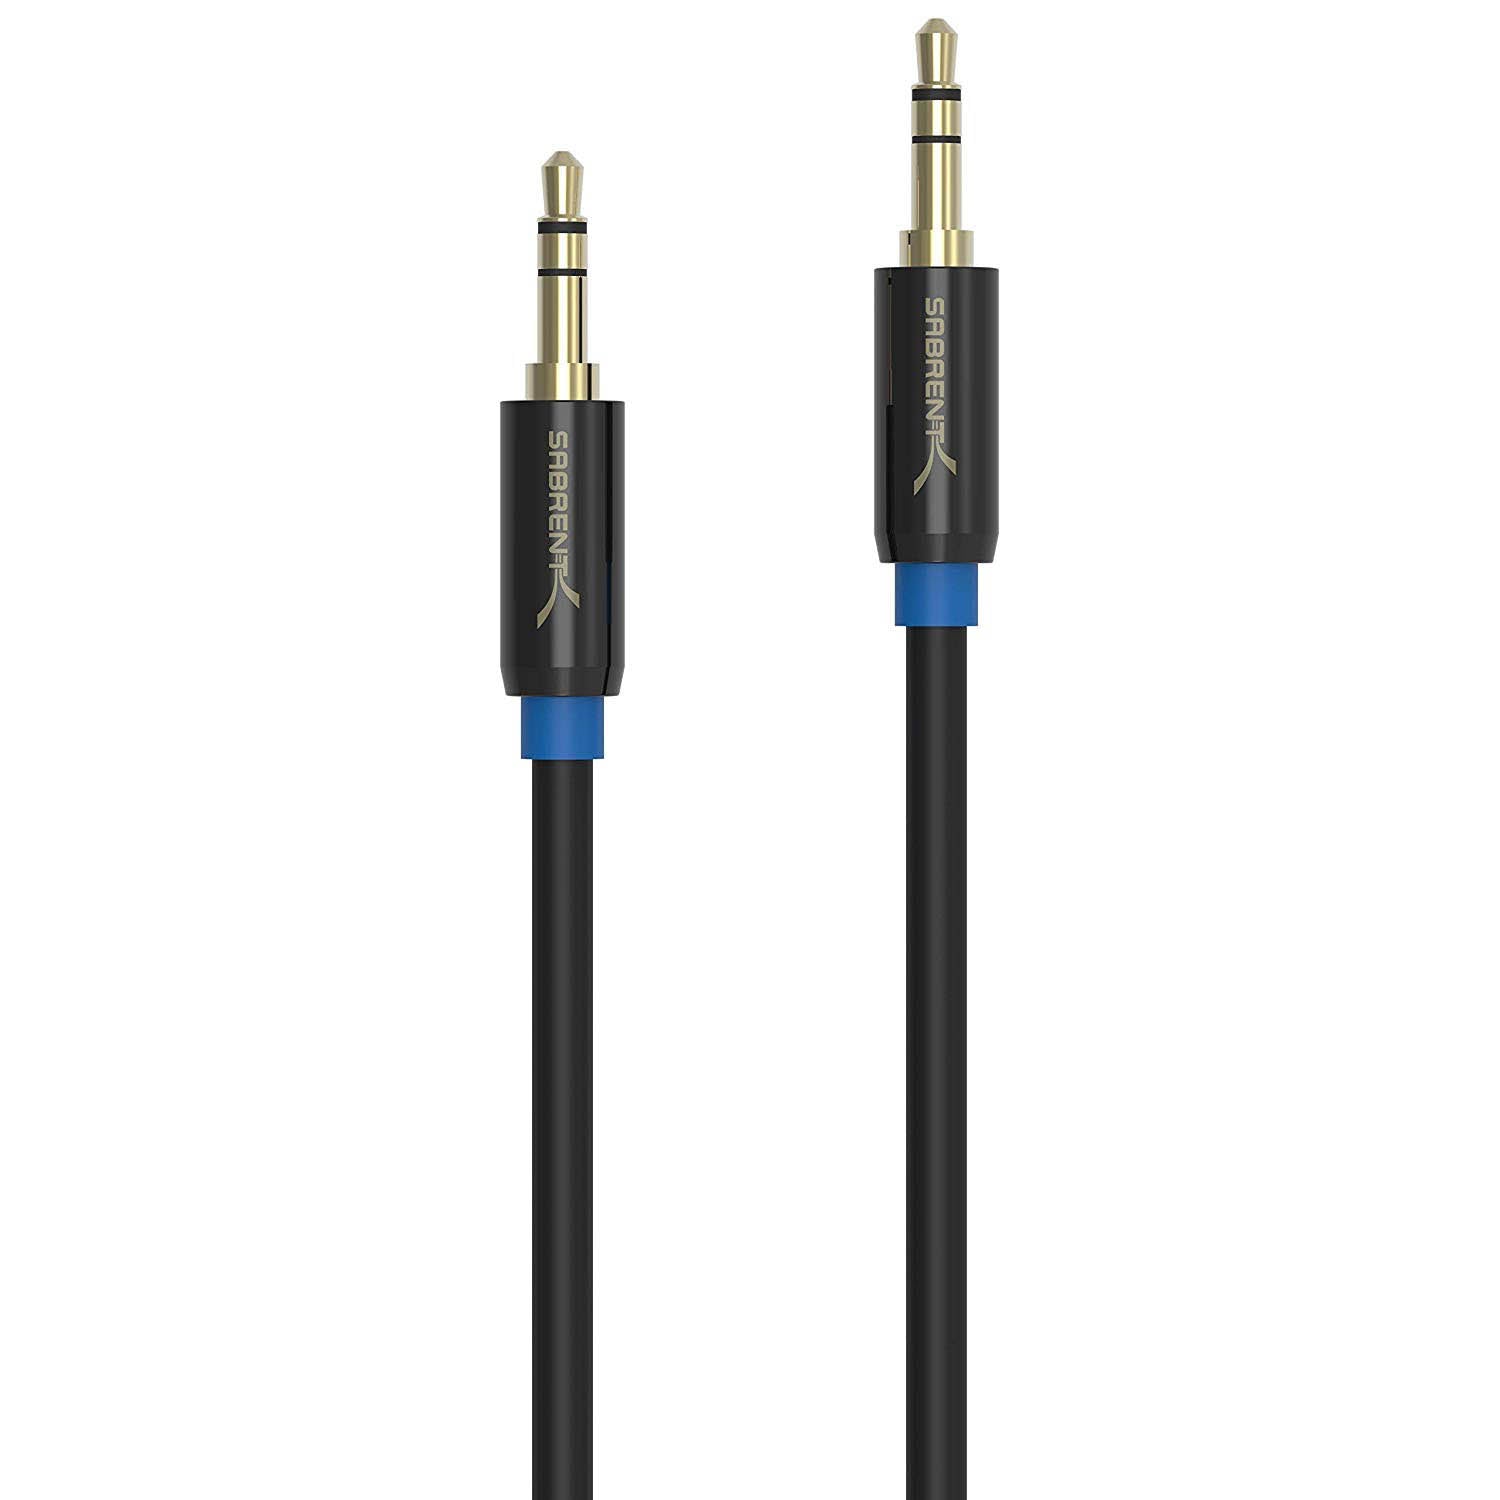 Essential Electrical Audio Cable Male to Male 3.5mm Stereo Jack